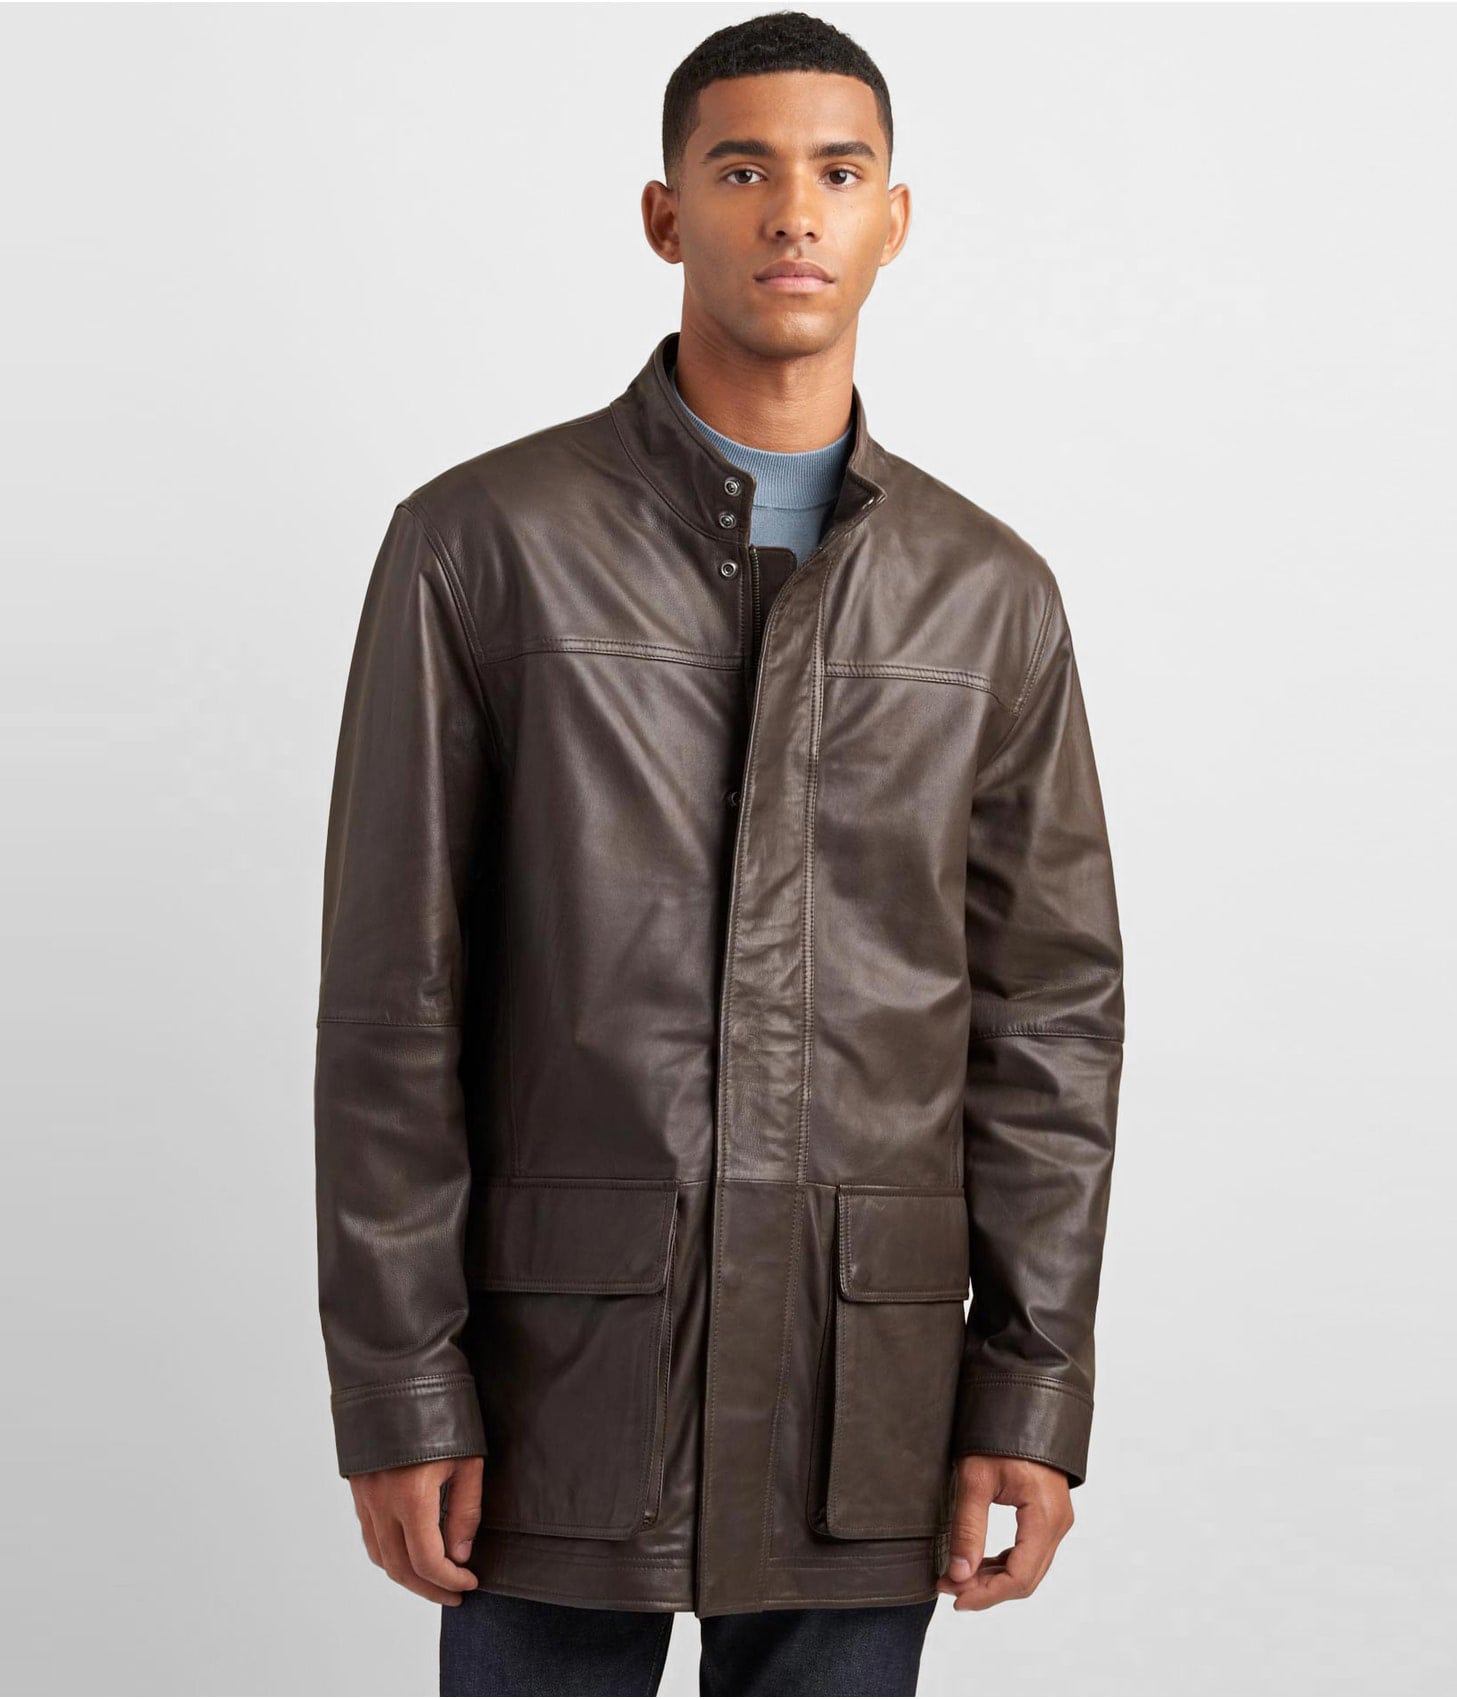 Men's Leather Coat In Dark Brown With Patch Pockets